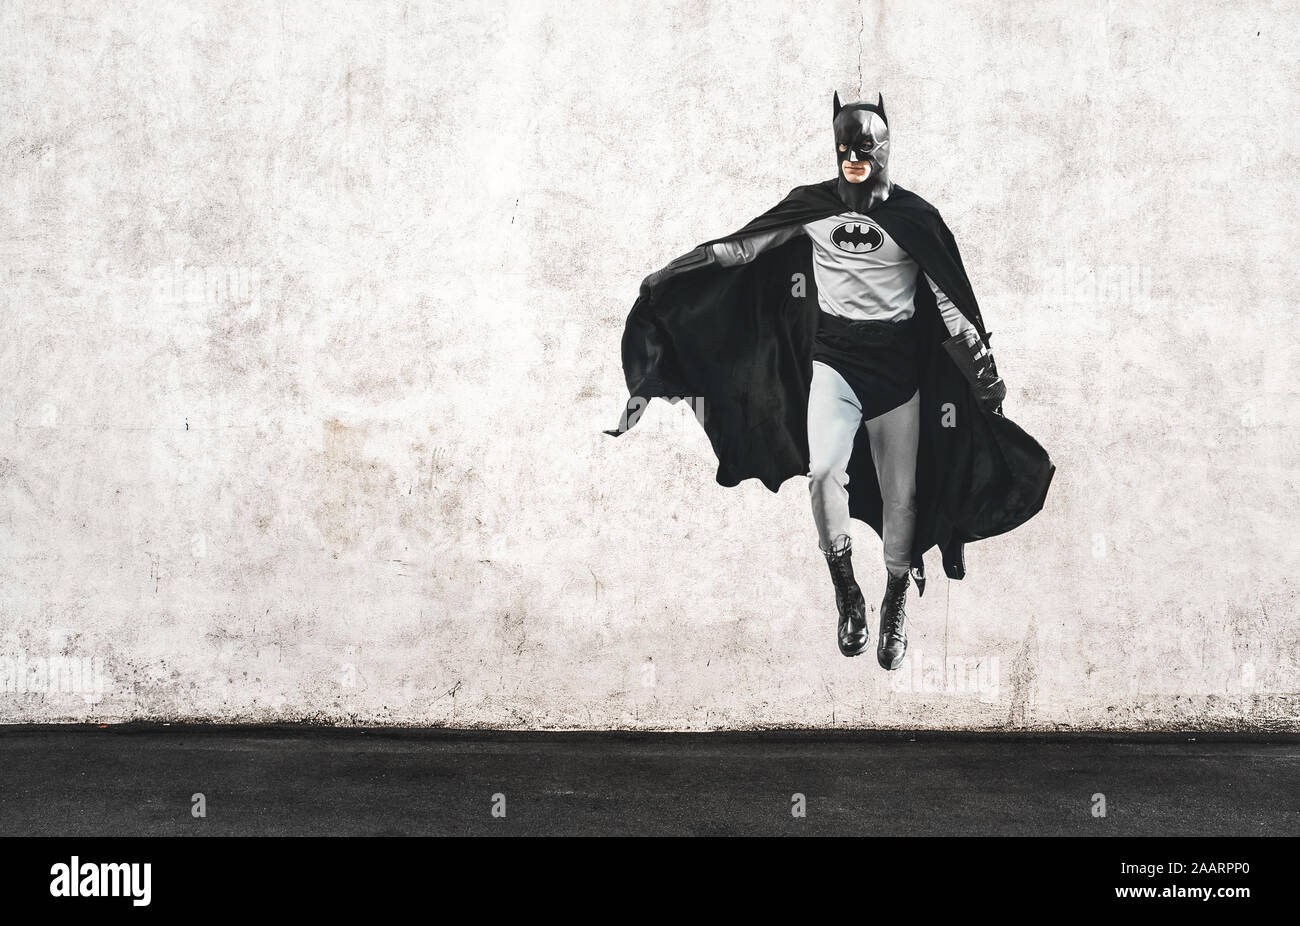 Batman character with flying pose in Hollywood blvd Stock Photo